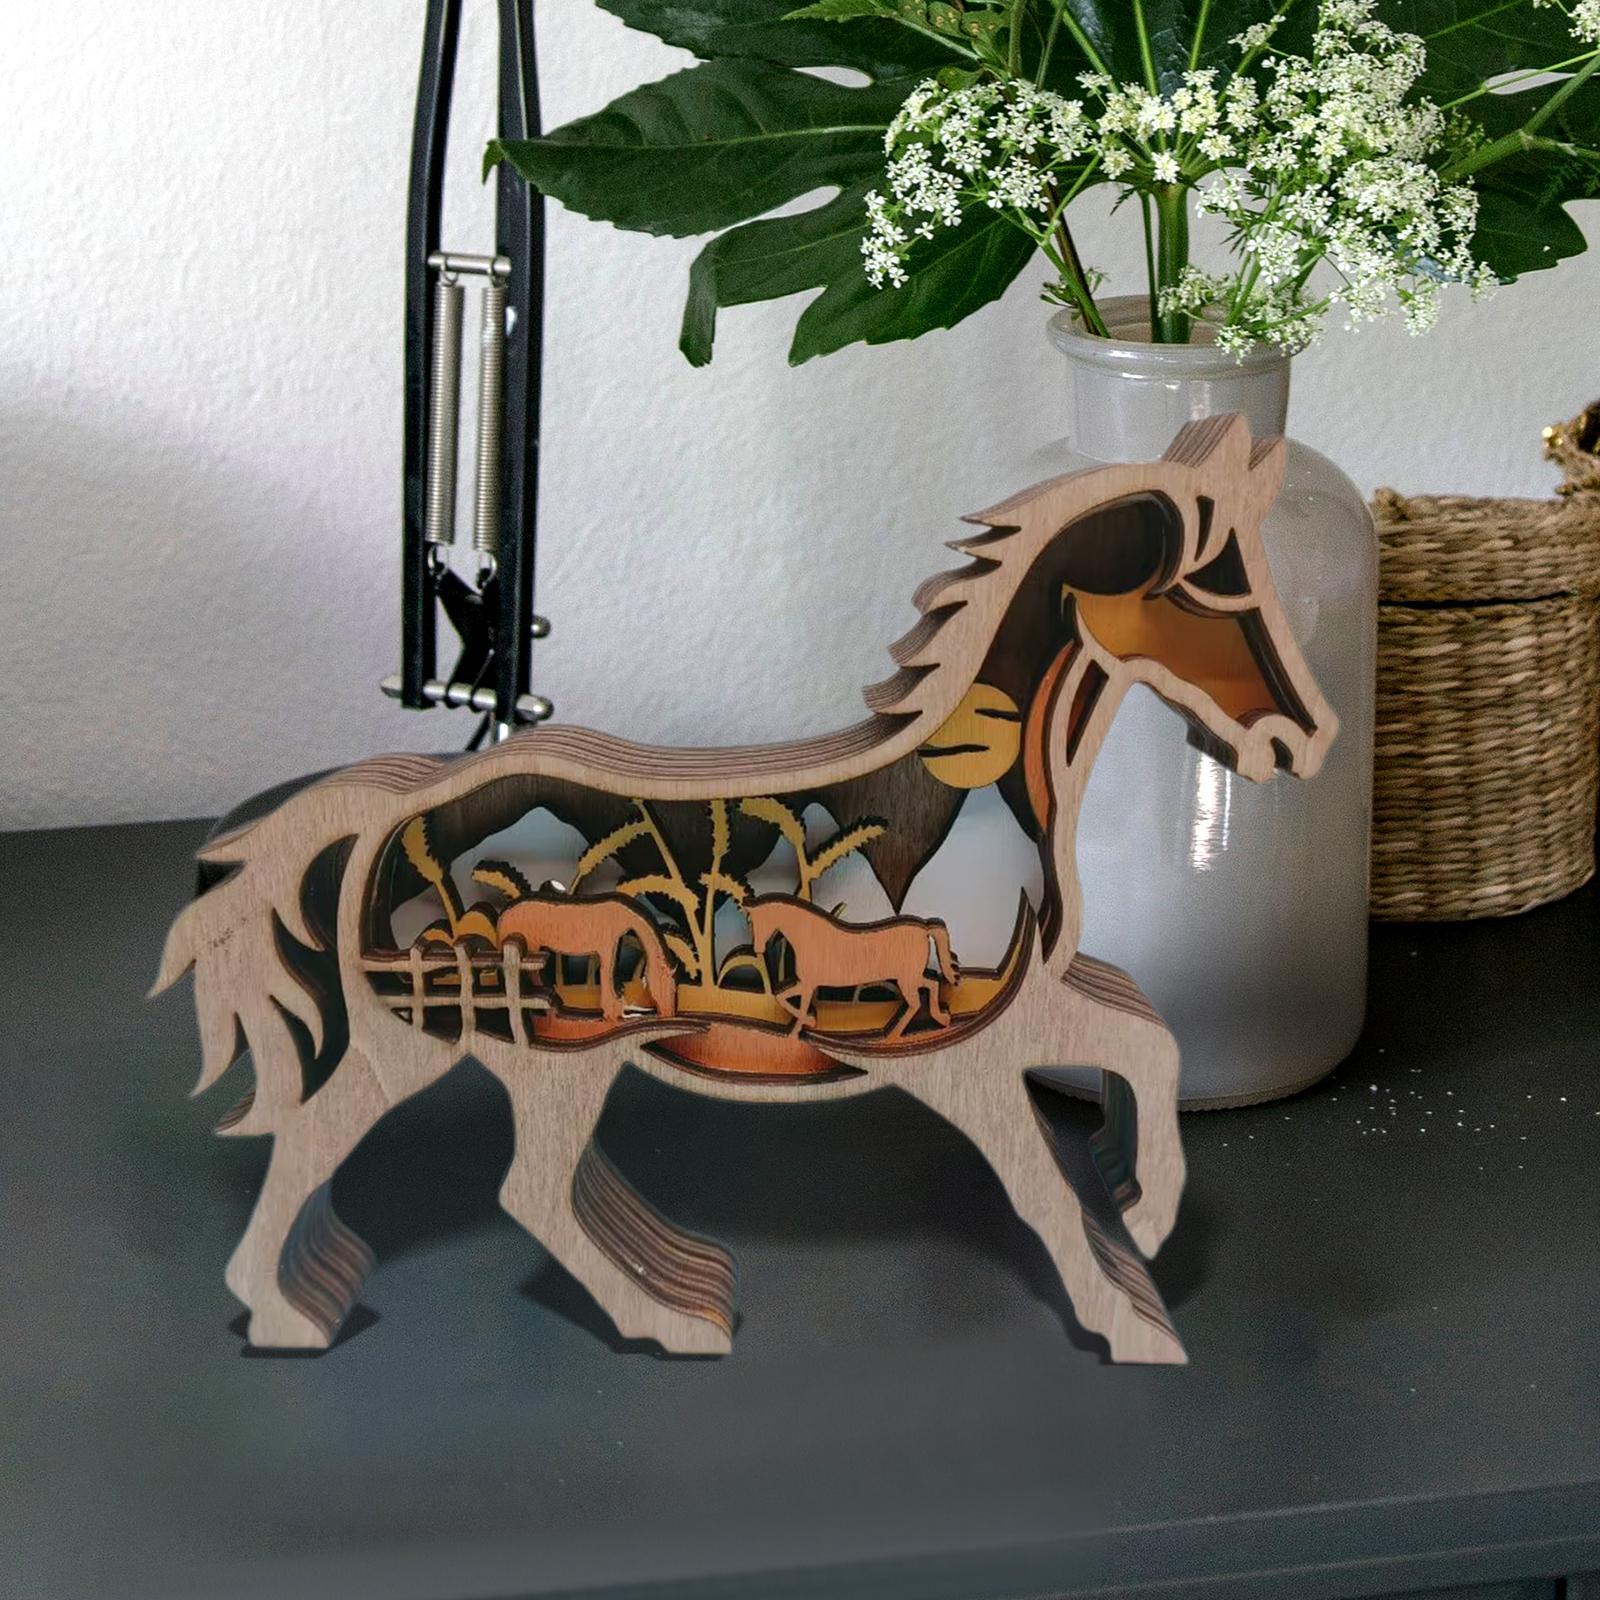 Wood Animal Horse Statue 3D Retro Hollowed Engraving Sculpture for Party